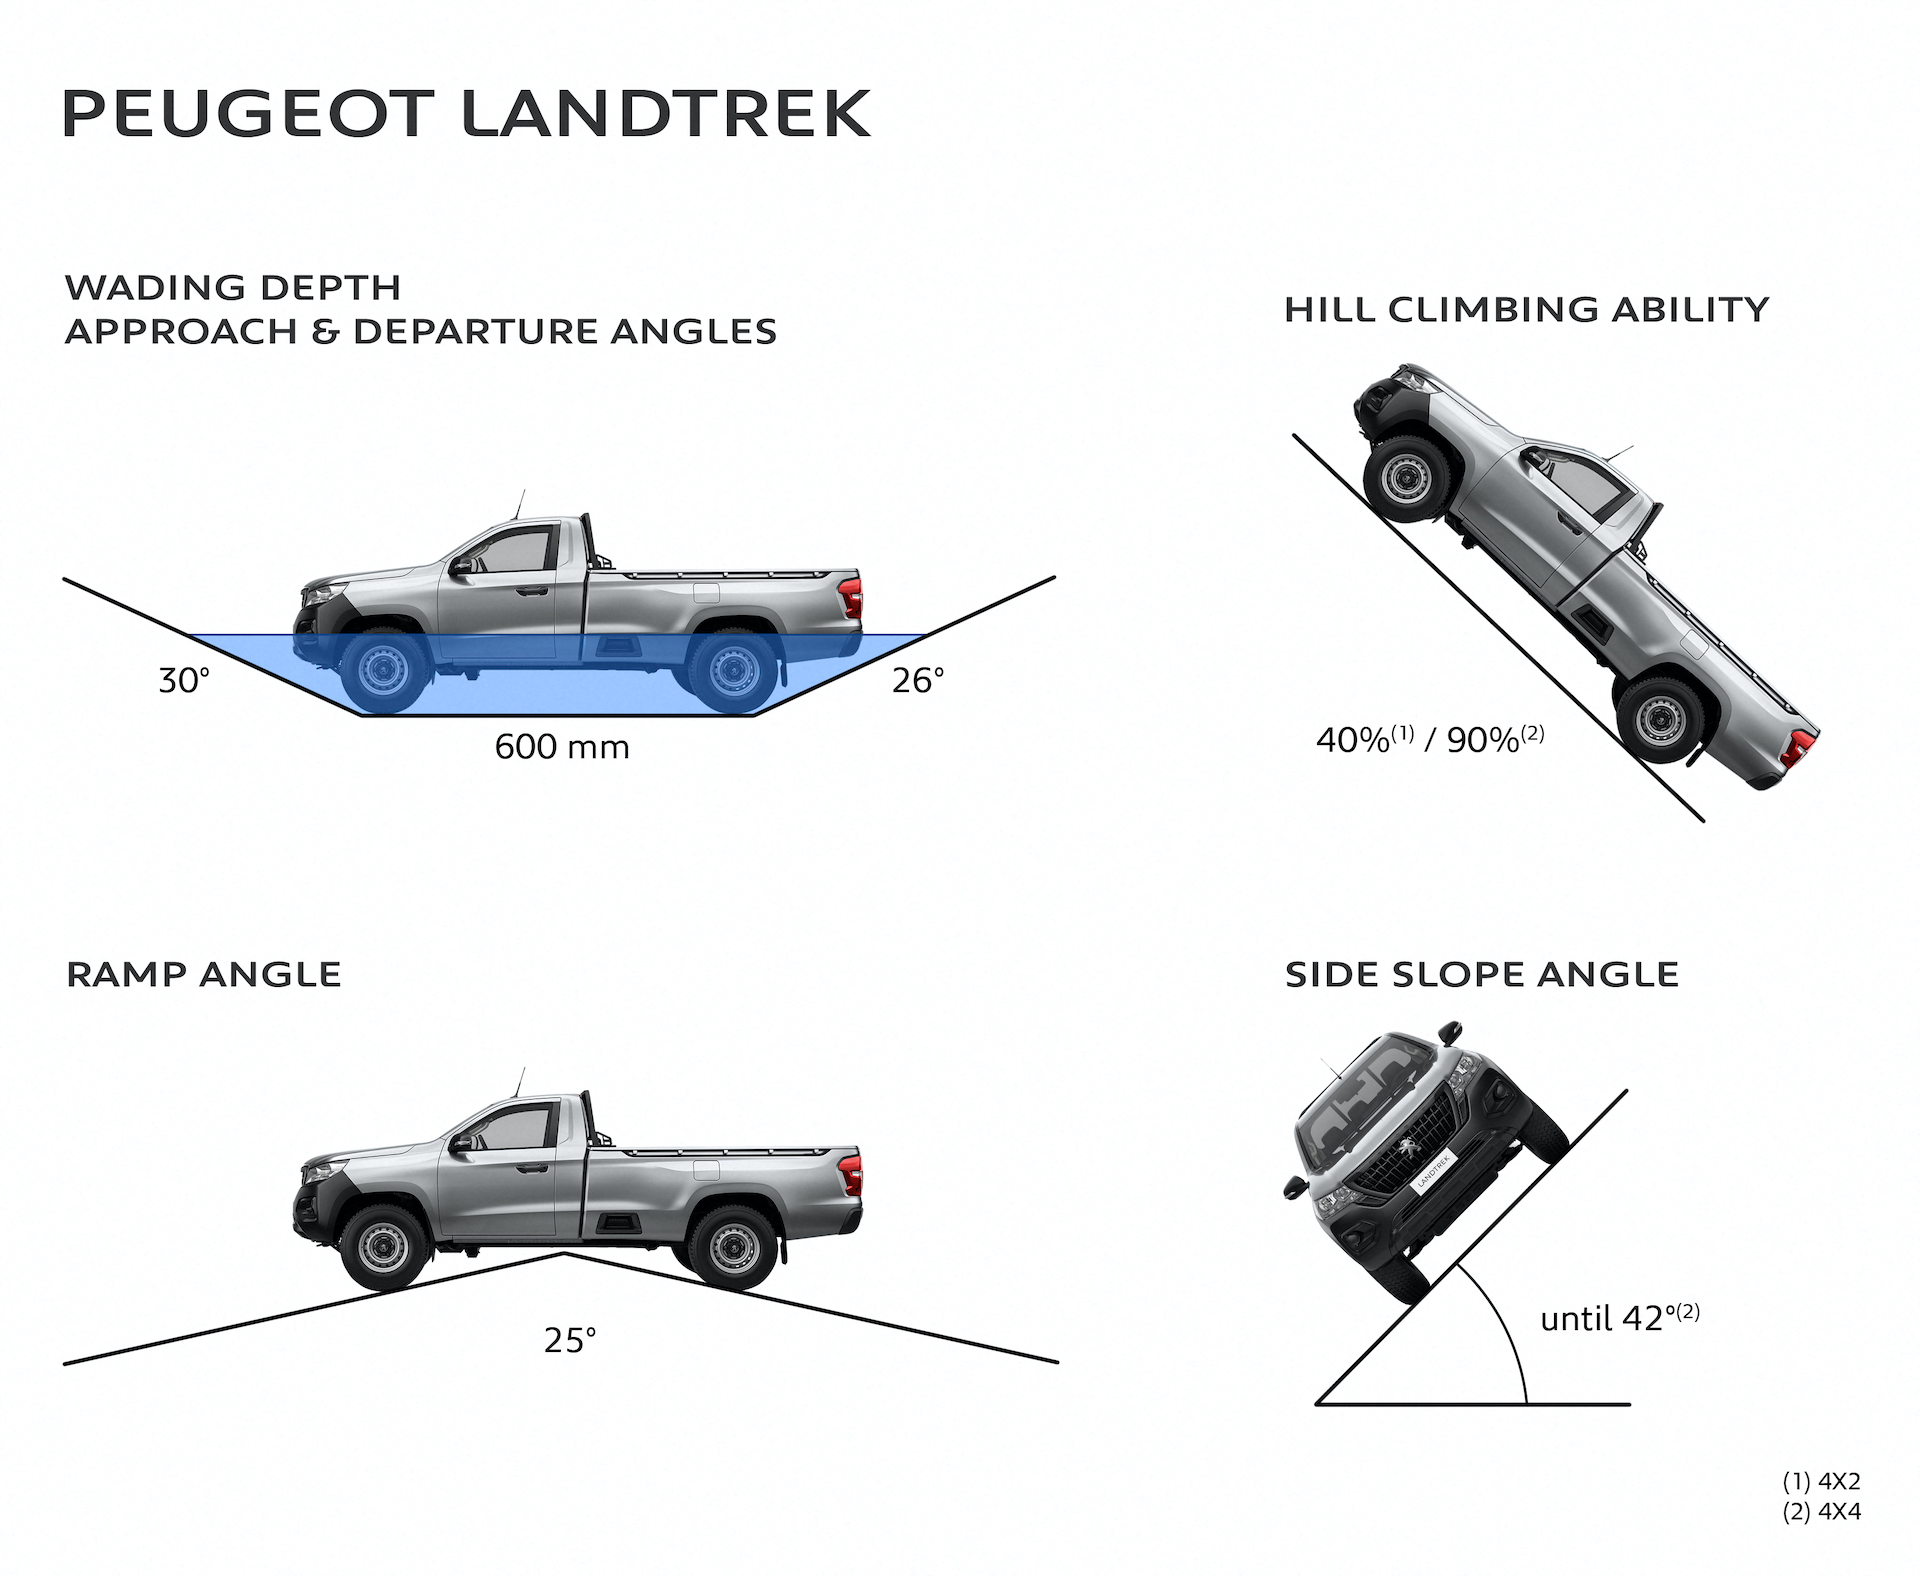 Meet the Peugeot LandTrek: A Pick-Up For The Rest of the World